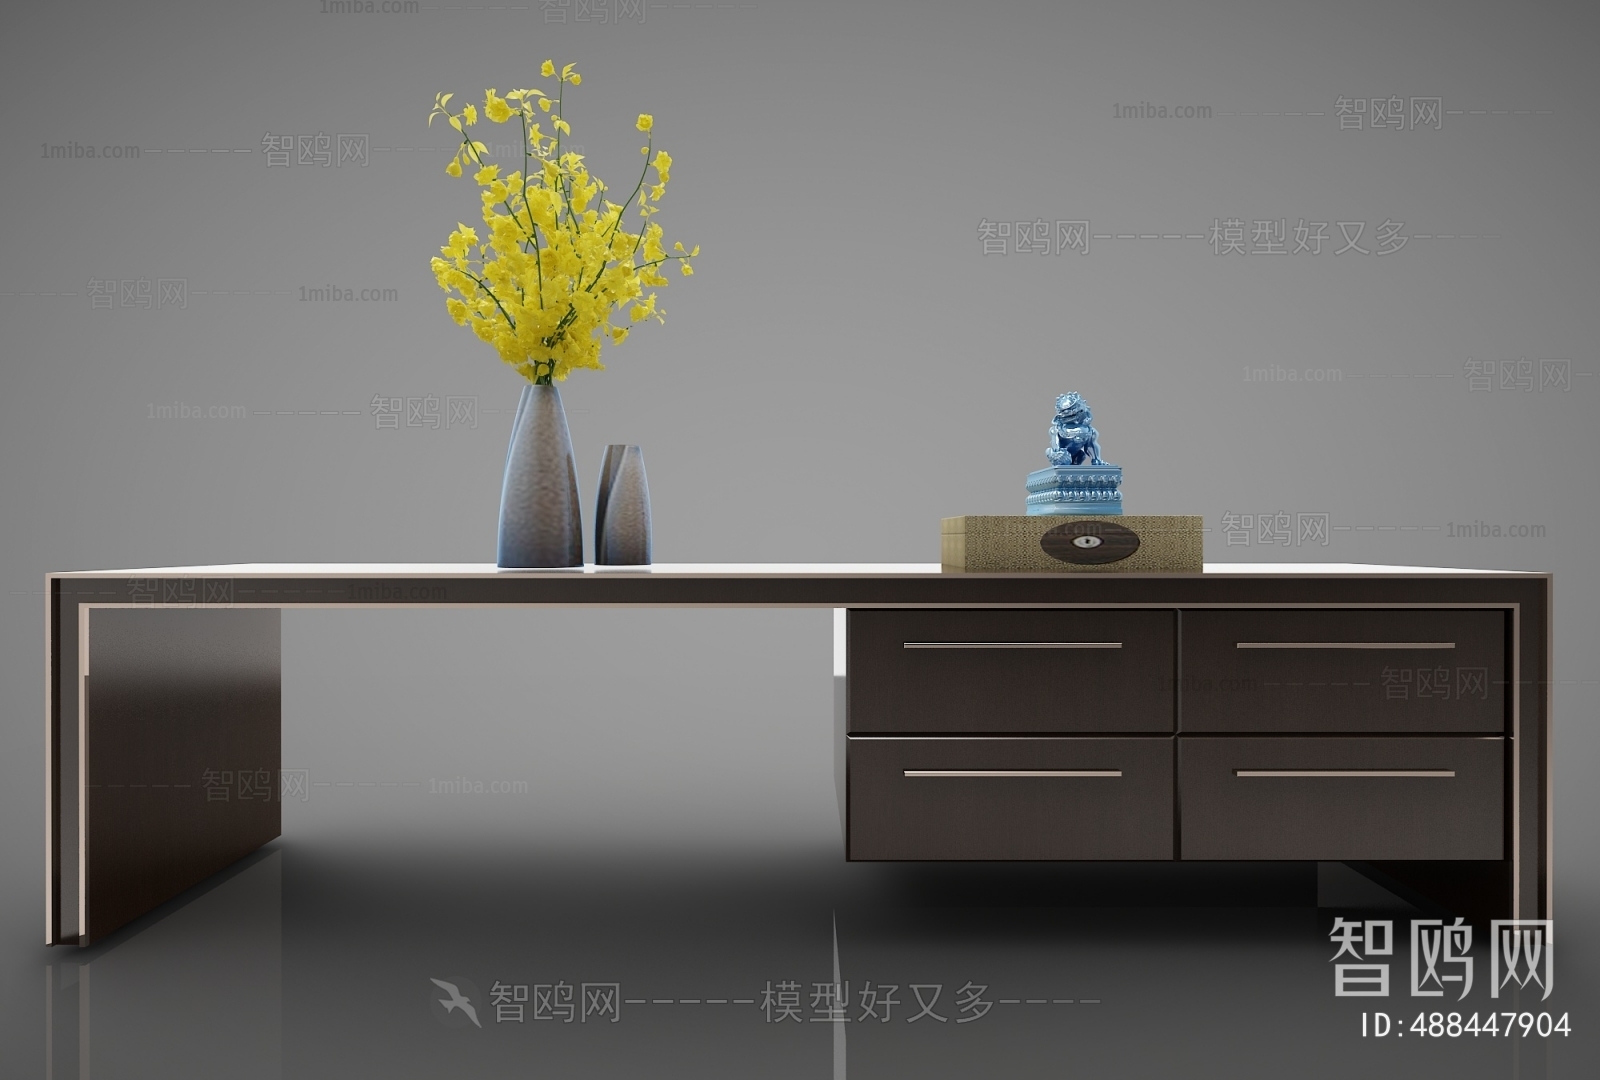 New Chinese Style Desk